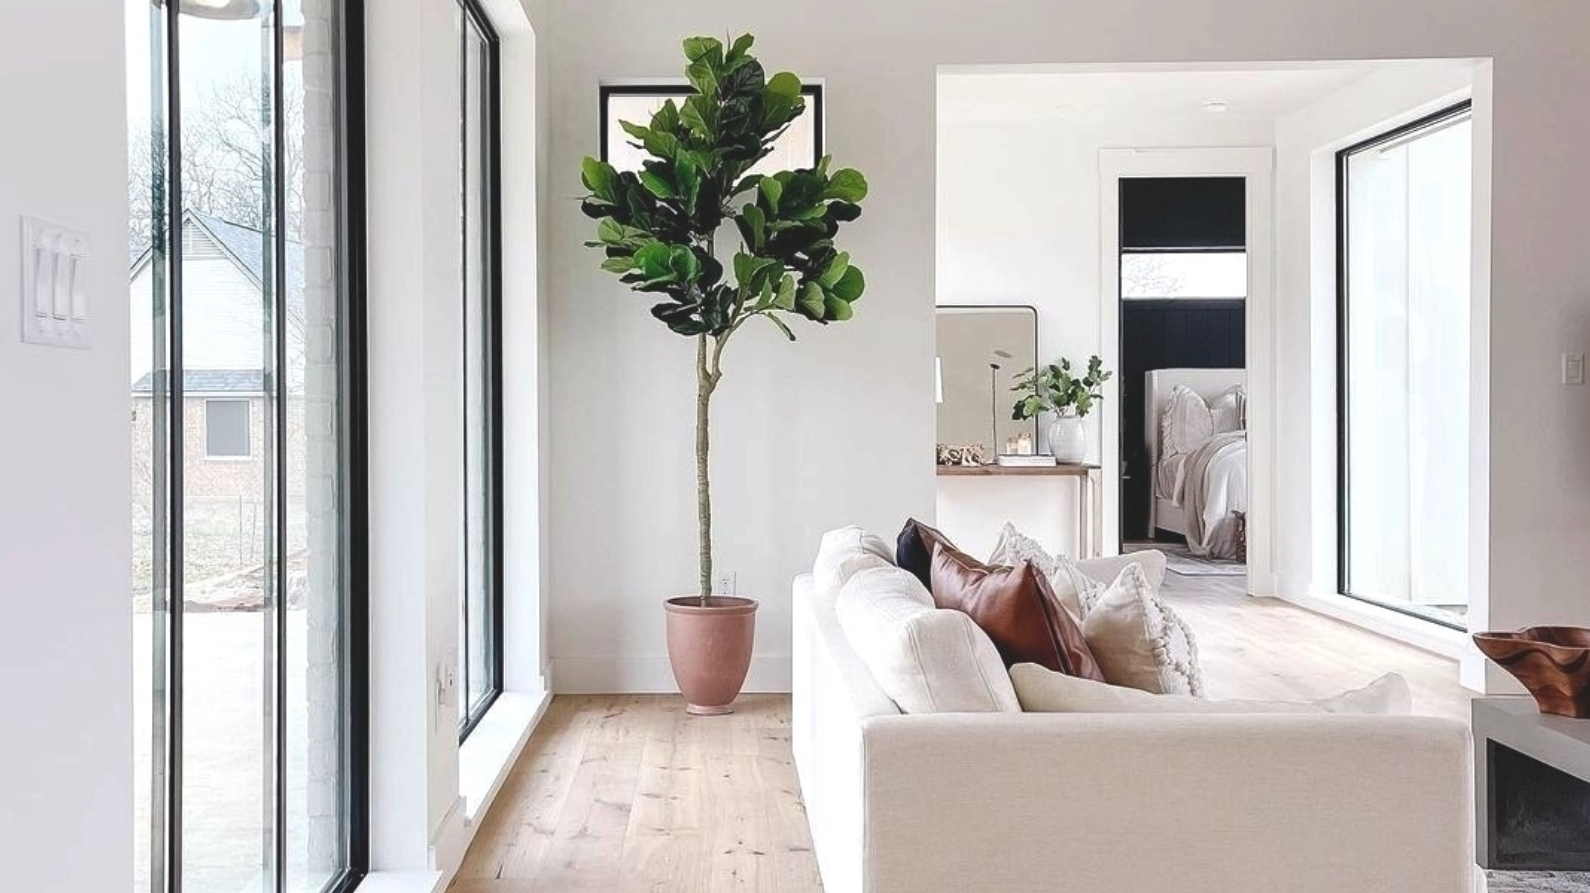 Keep It Simple: Faux Plants from Artiplanto for Minimalist Decor